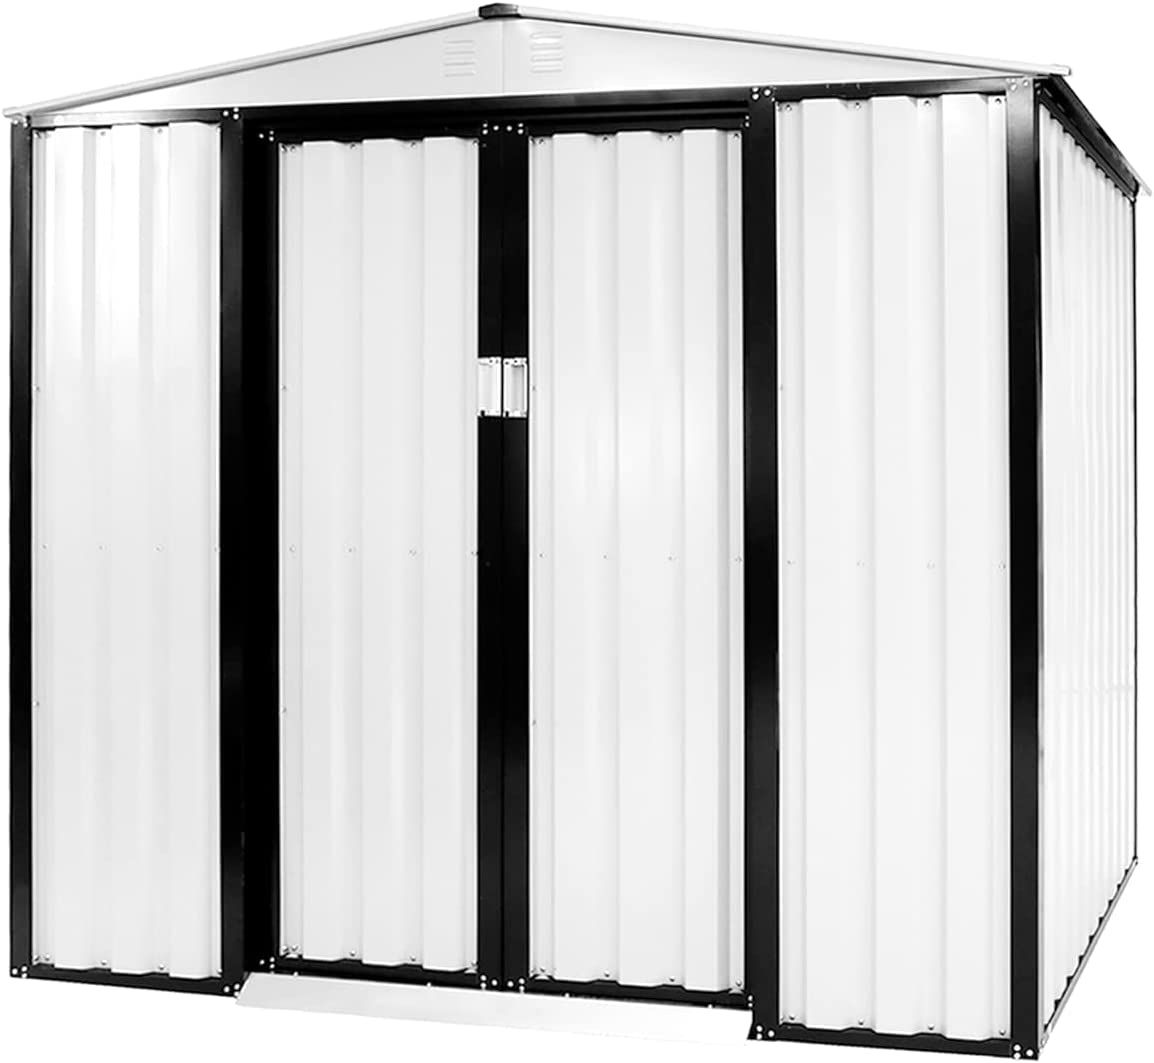 Patiomore 4’ x 6’ Outdoor Storage Shed